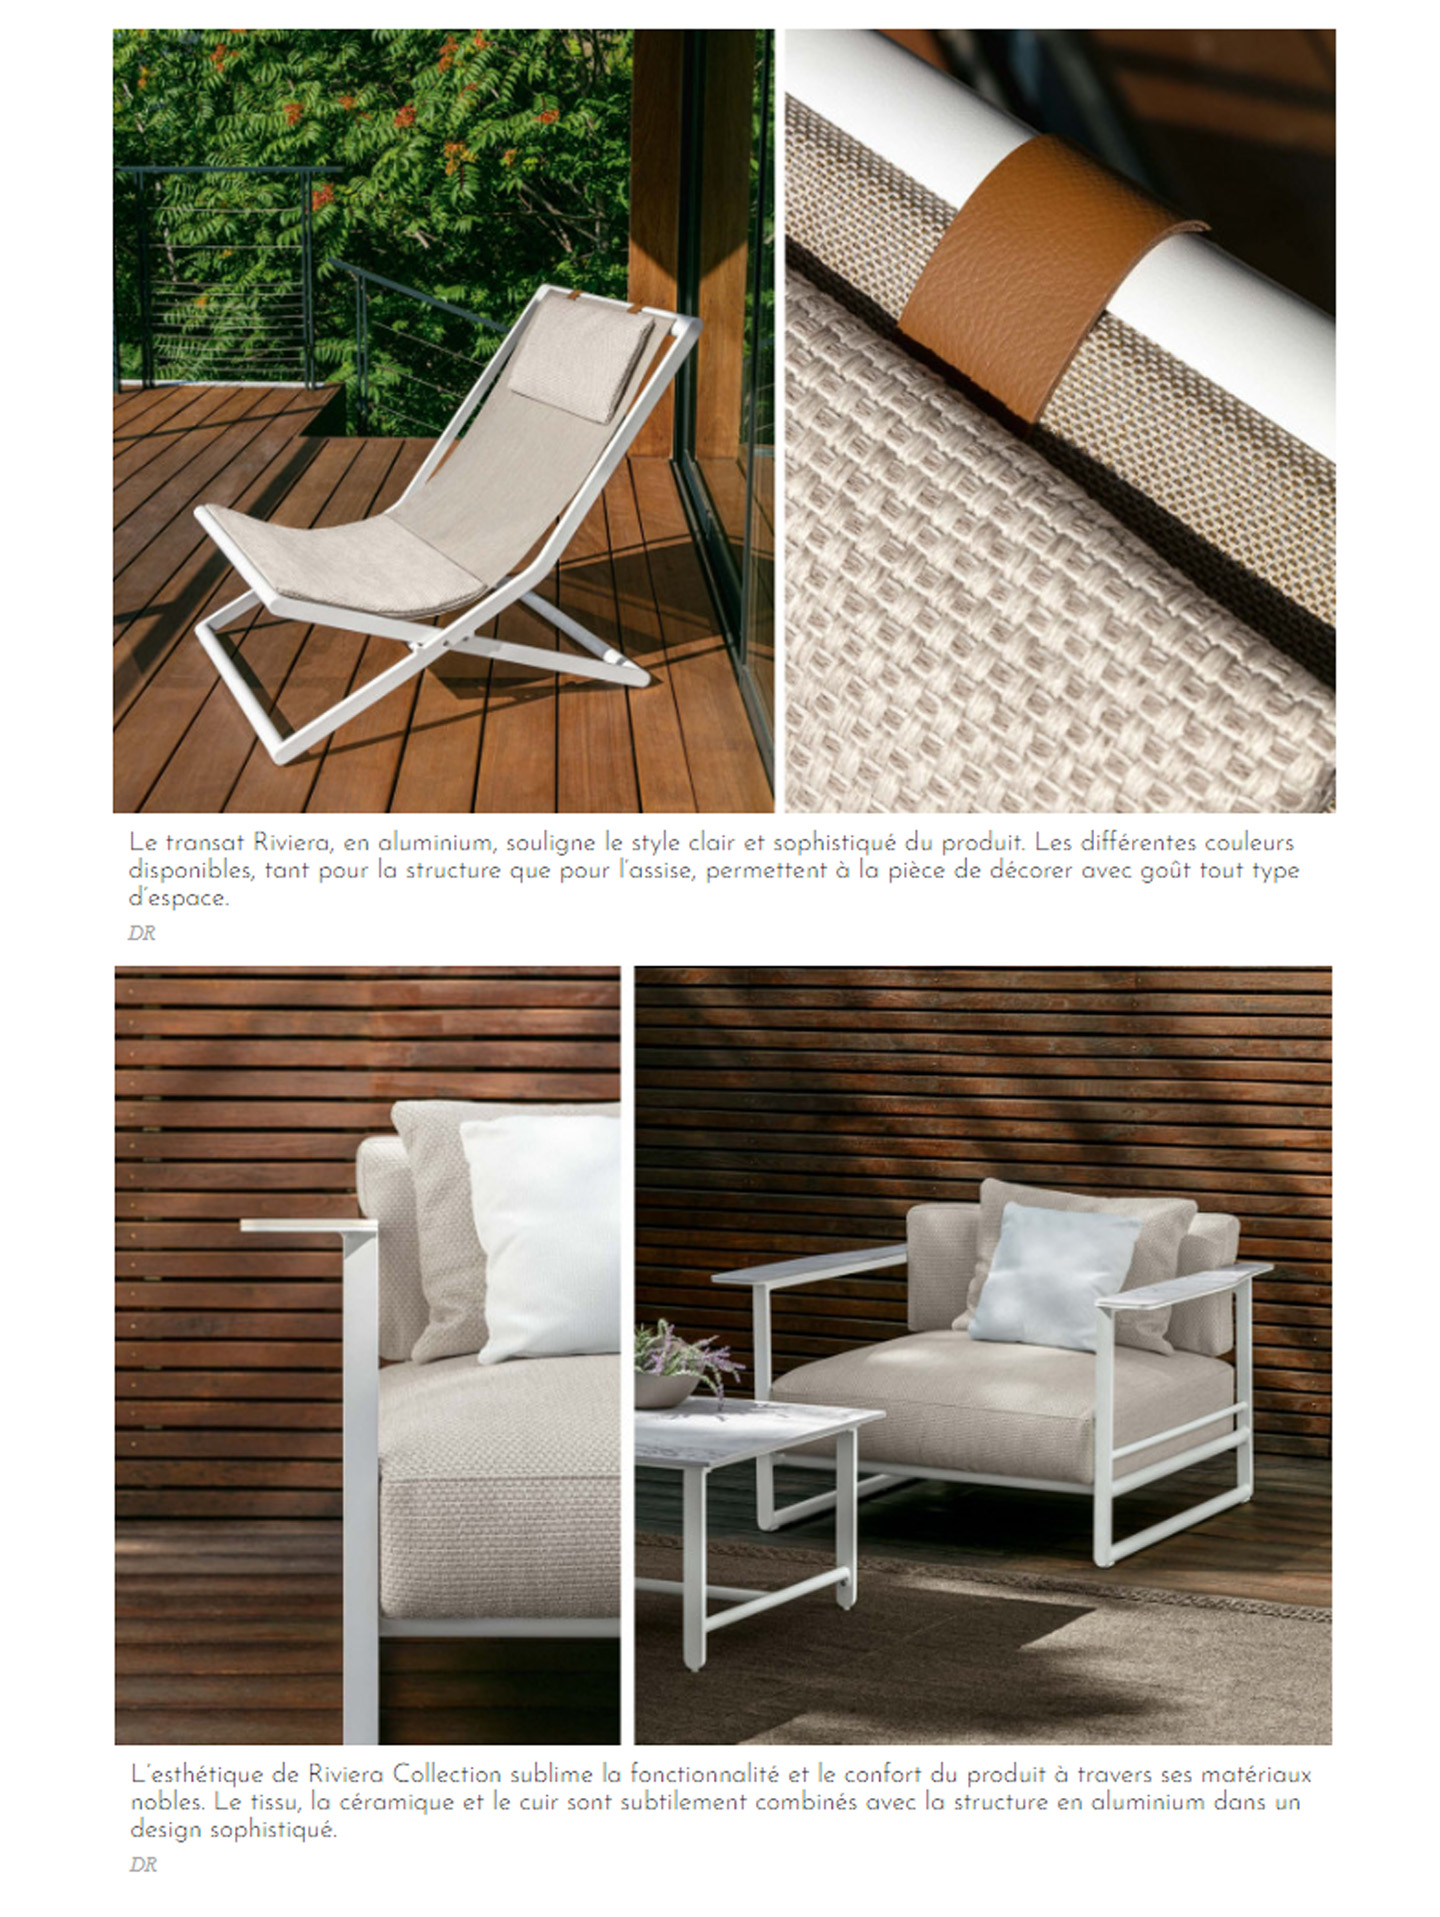 Article on the riviera range for talenti outdoor living created by the studio jean-philippe nuel, design of objects and furniture, garden furniture, french designer